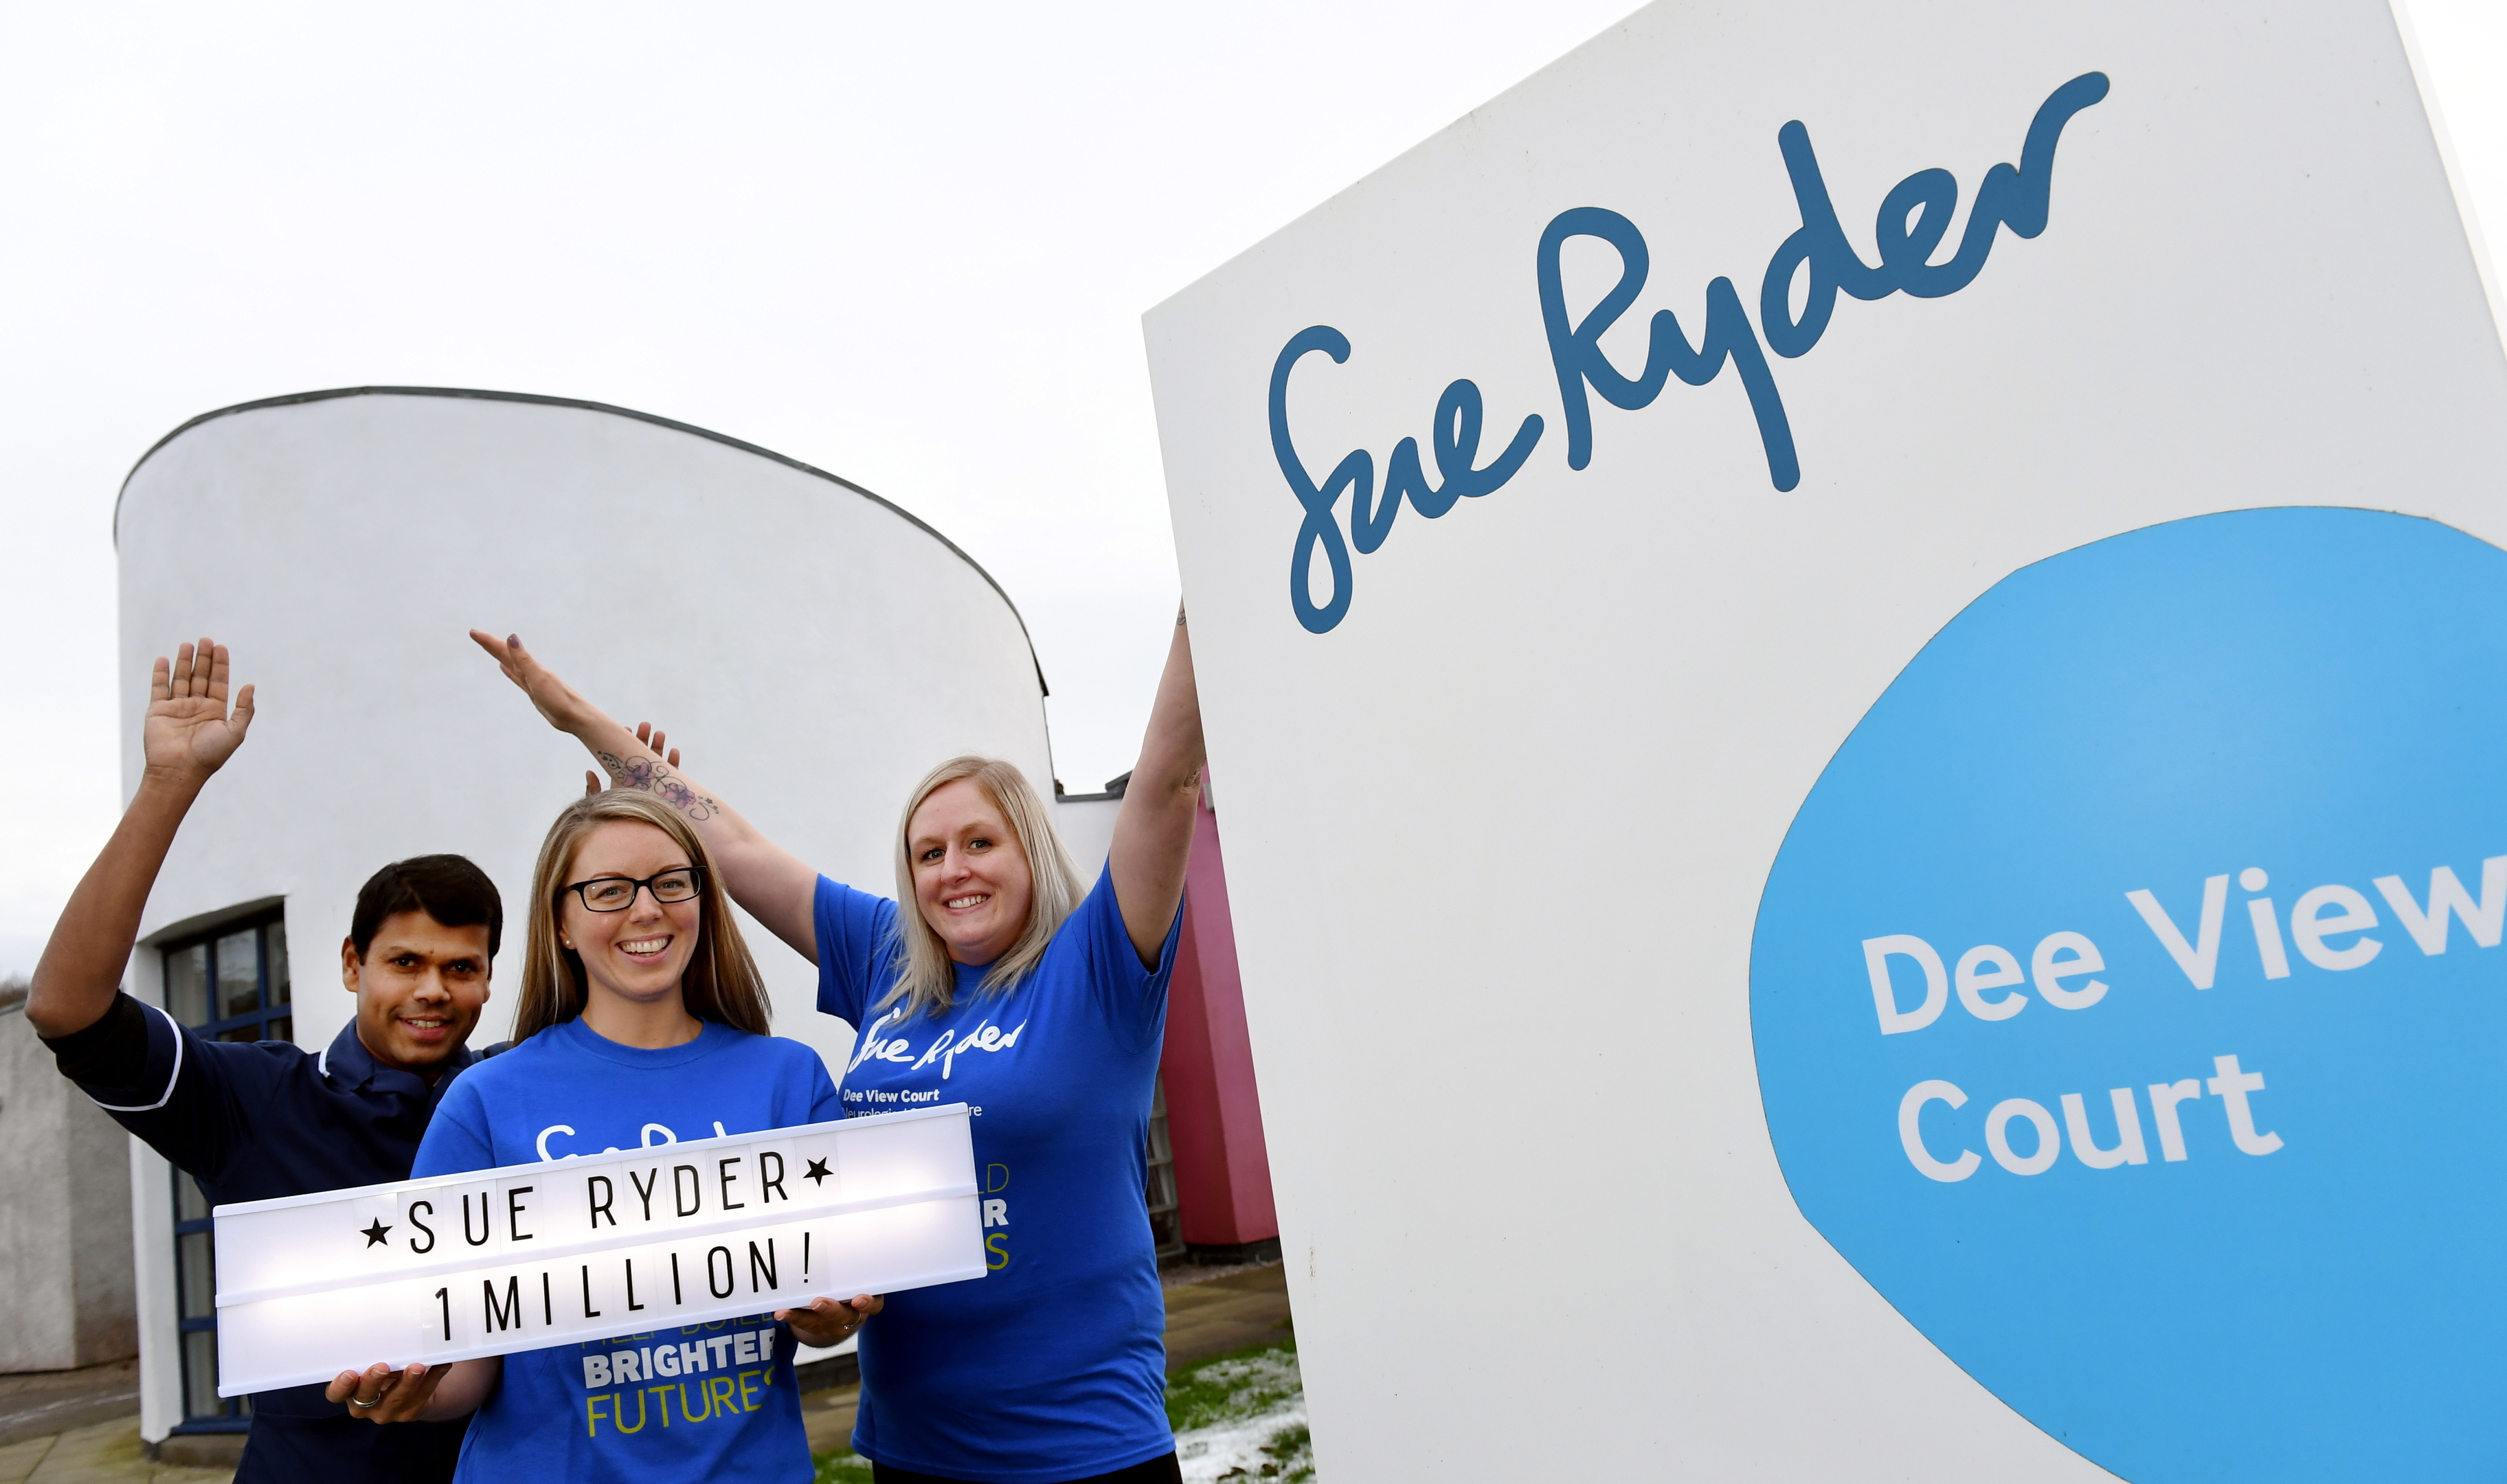 Sue Ryder have reached the £1 million mark in their Dee View Court appeal.